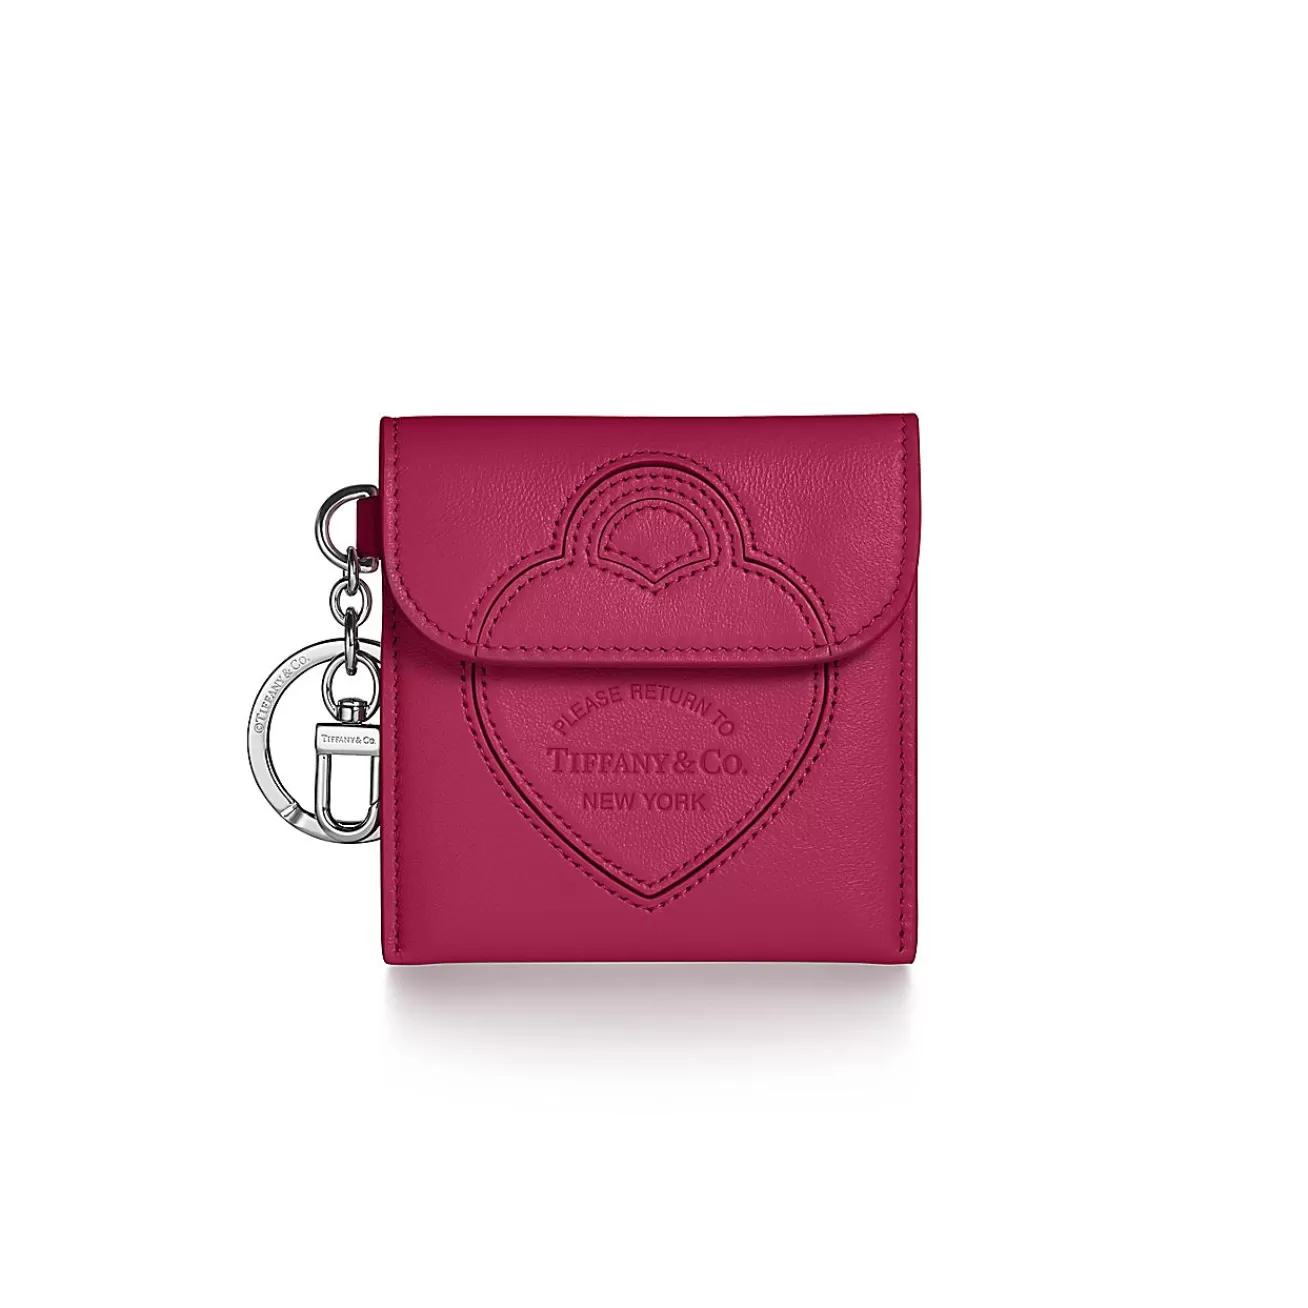 Tiffany & Co. Return to Tiffany® Pouch Bag Charm in Fuchsia Leather | ^Women Business Gifts | Small Leather Goods